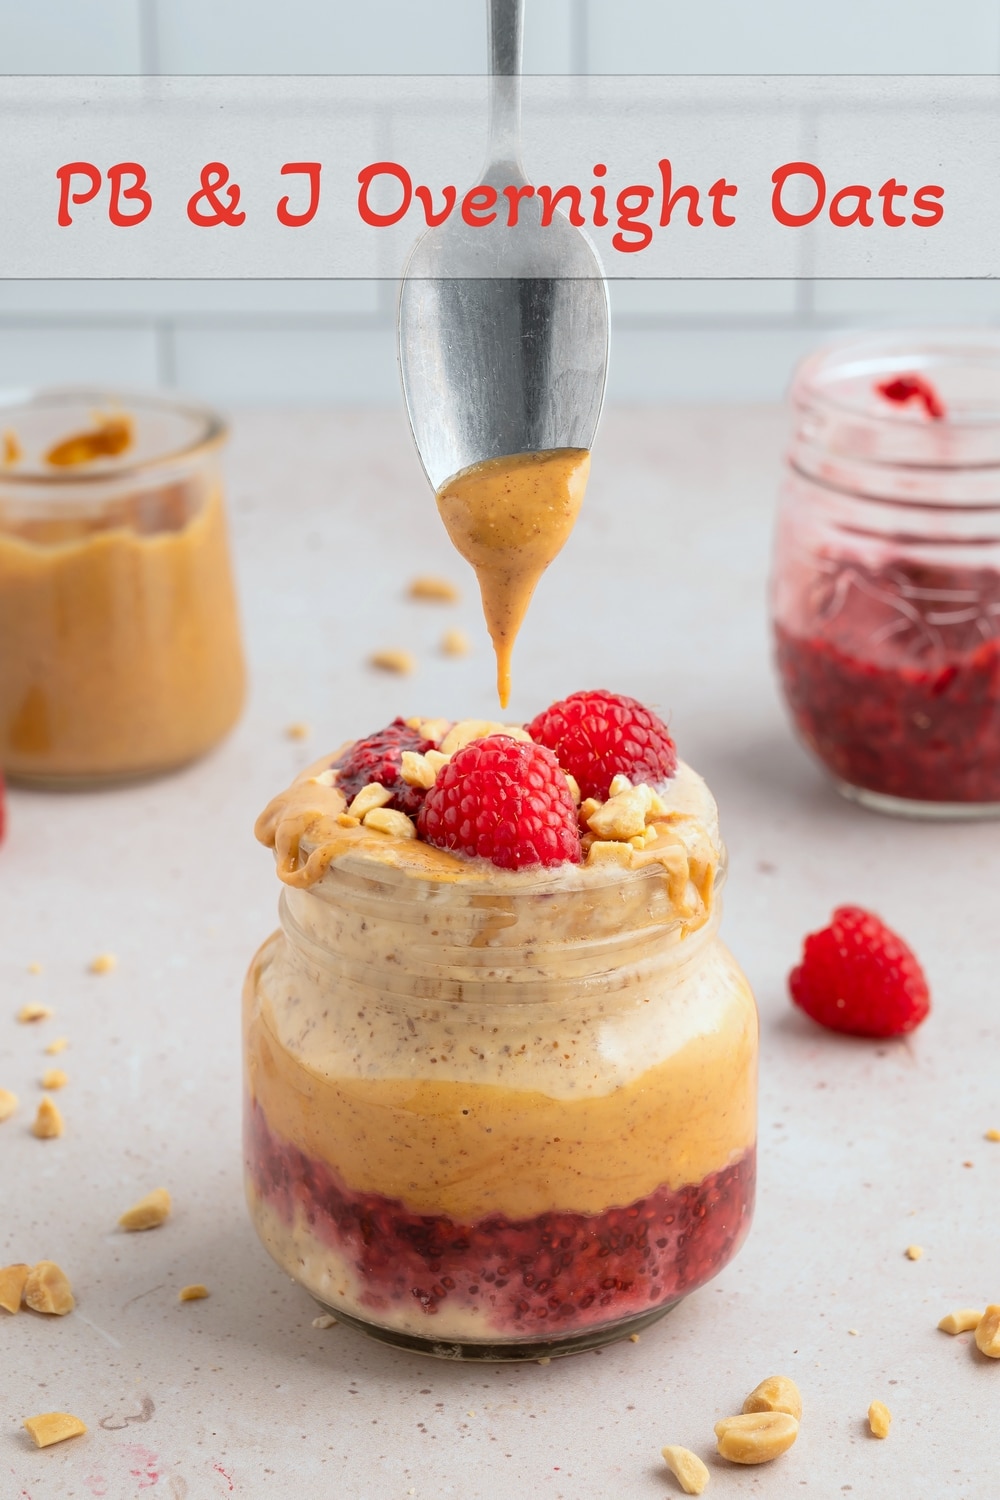 These ooey gooey peanut butter and jelly overnight oats are outrageously delicious, wholesome and can be prepared in just five minutes. This unbeatable and comforting flavor combo is the perfect way to start your day. via @cmpollak1